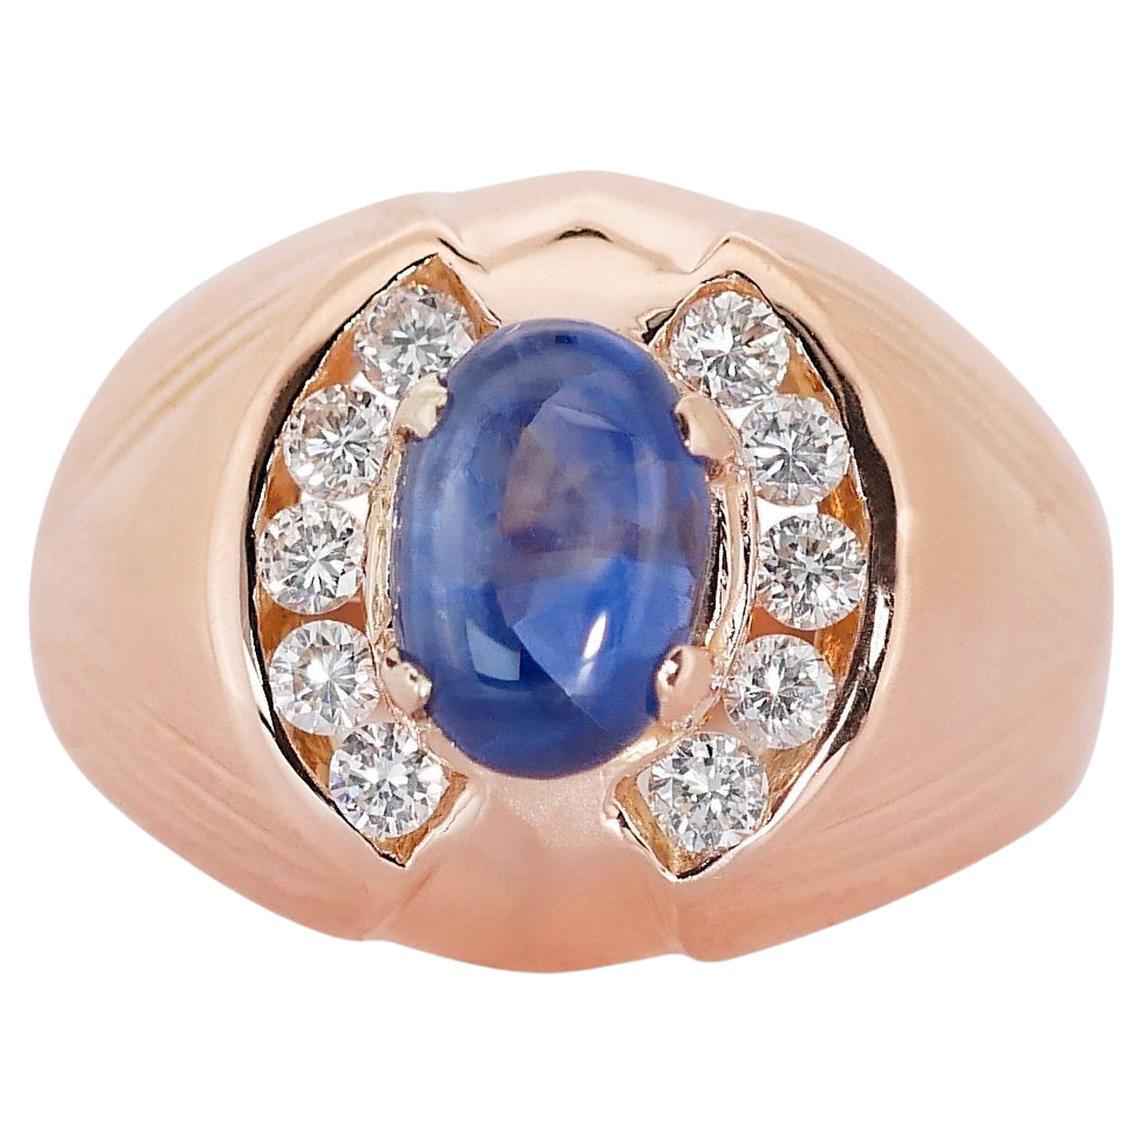 Exquisite 18 kt. Pink Gold Ring w/ 2.50 ctSapphire and Natural Diamonds IGI Cert